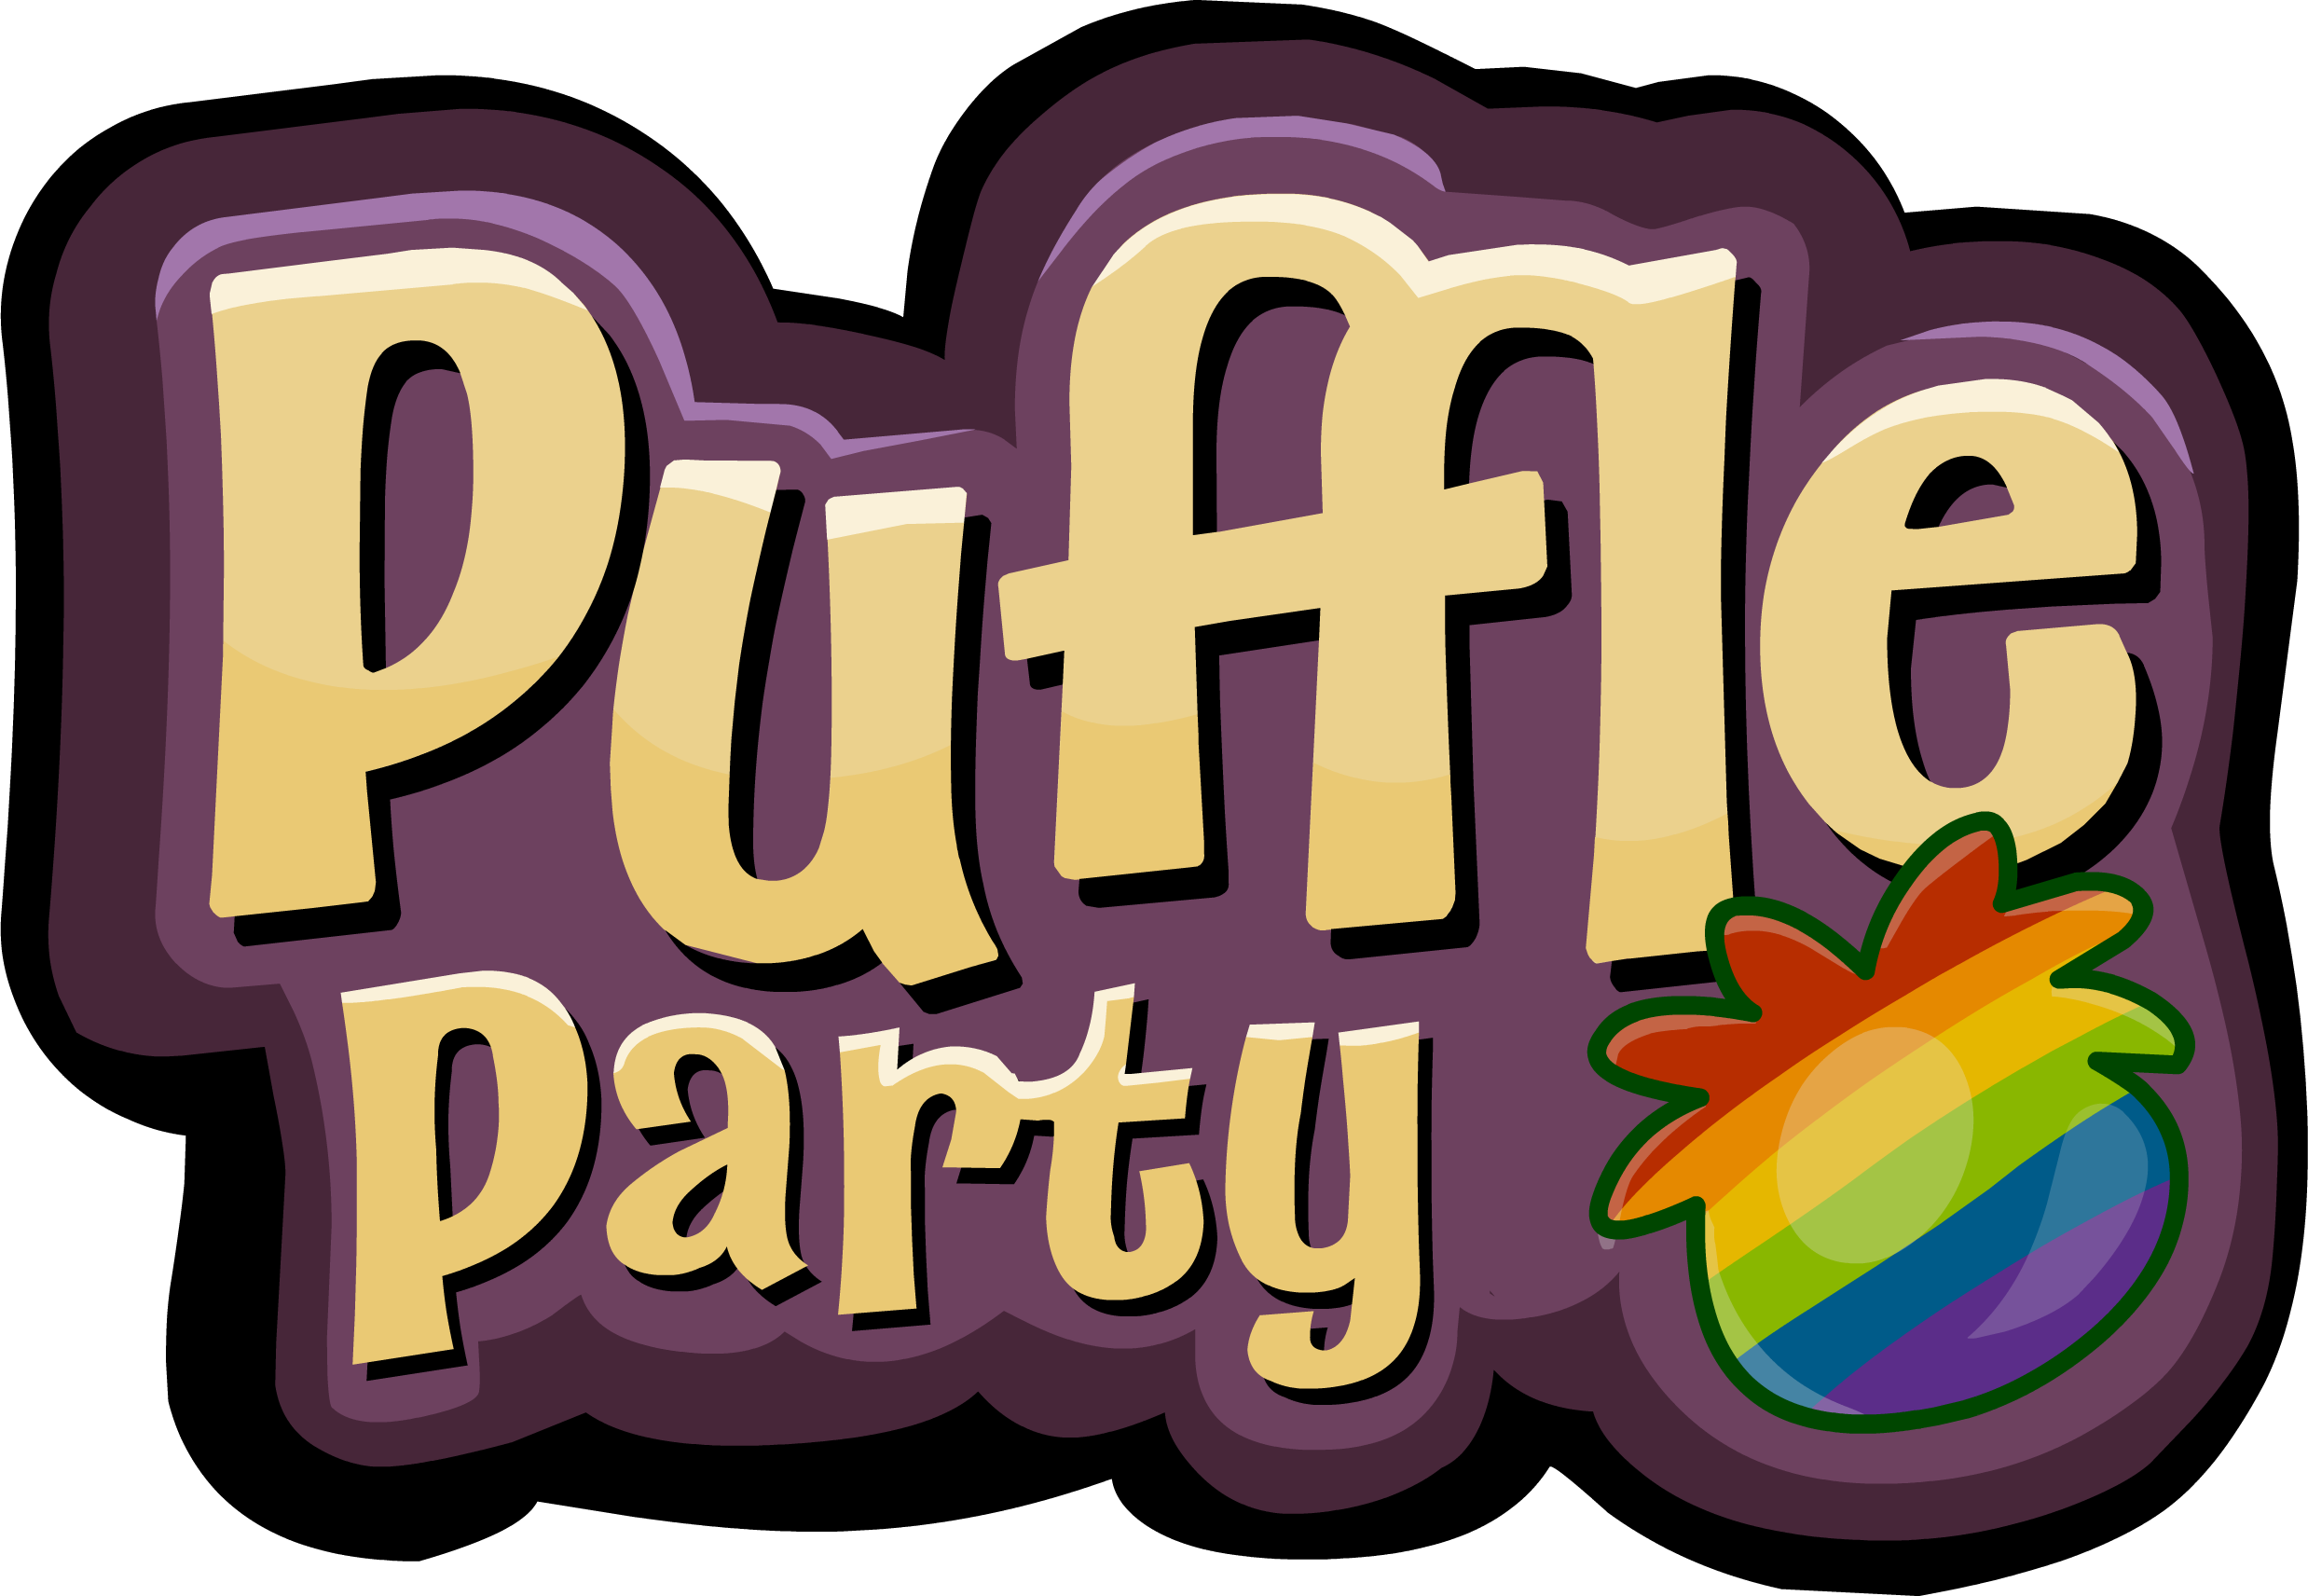 List of Parties and Events in 2013 | Club Penguin Wiki | Fandom